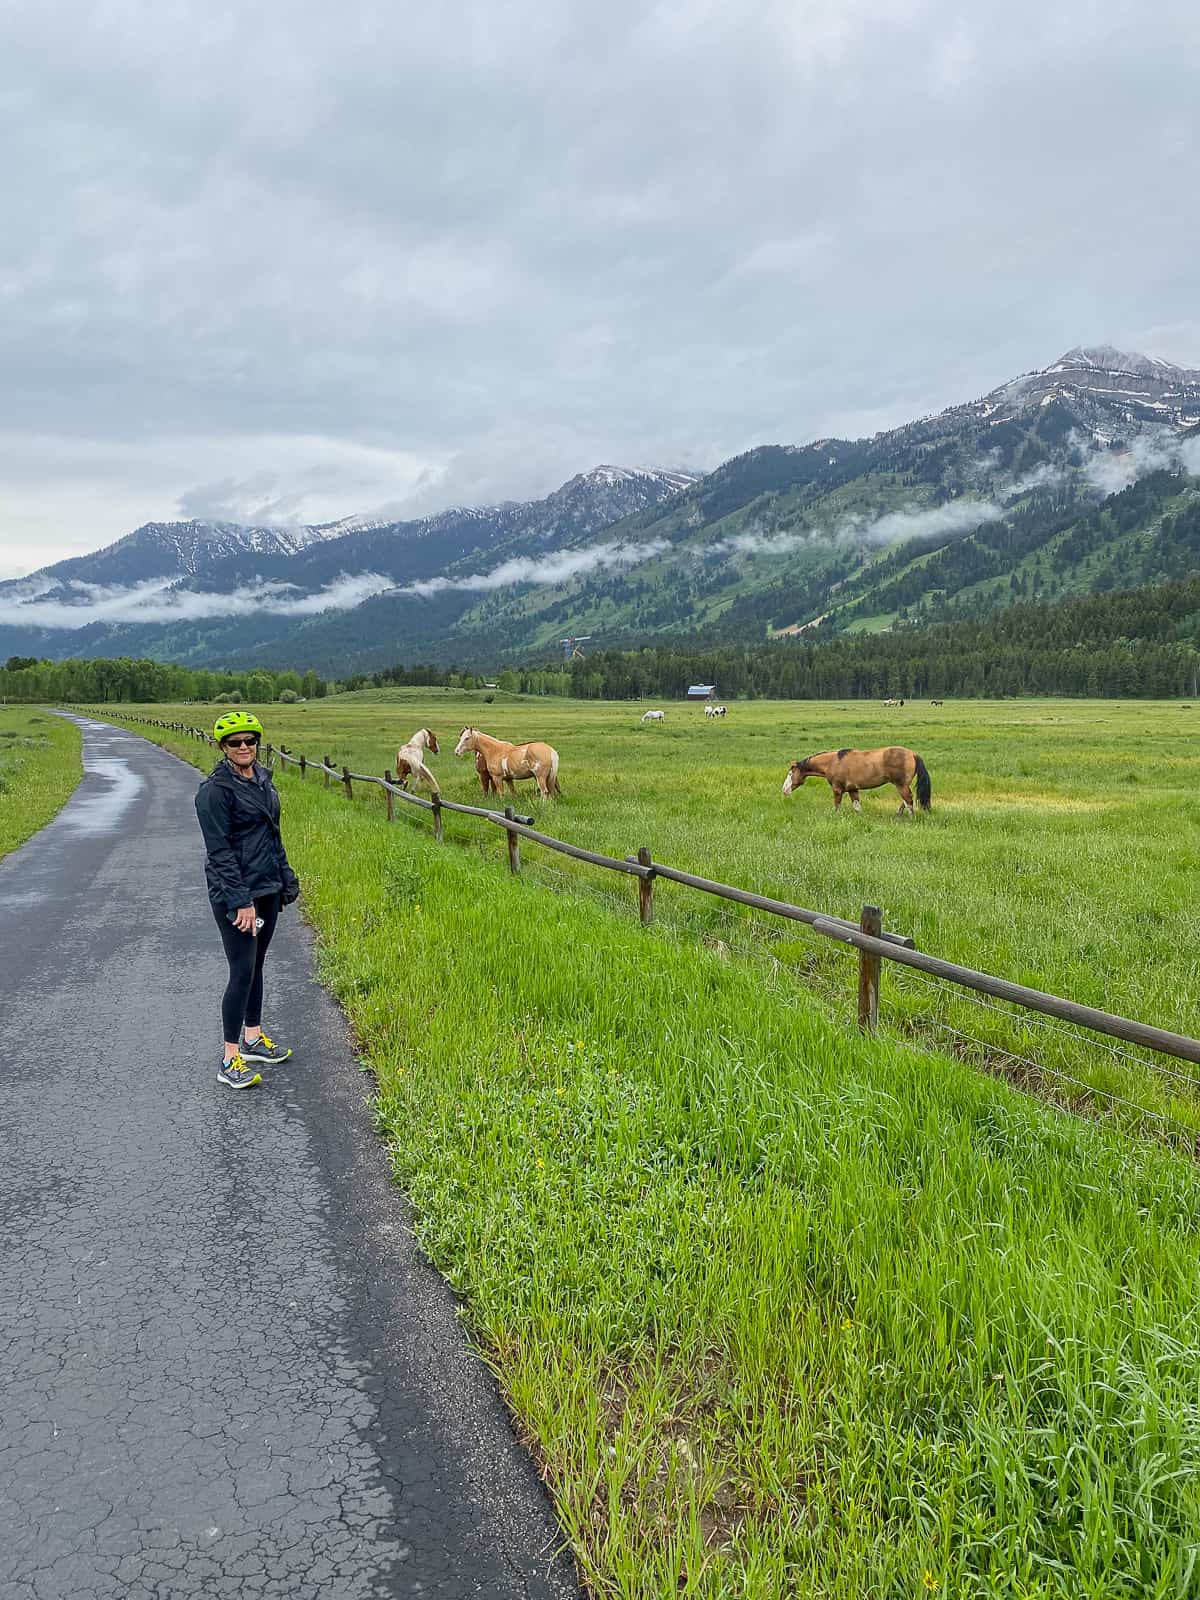 Me by the horses alongside the mountains.